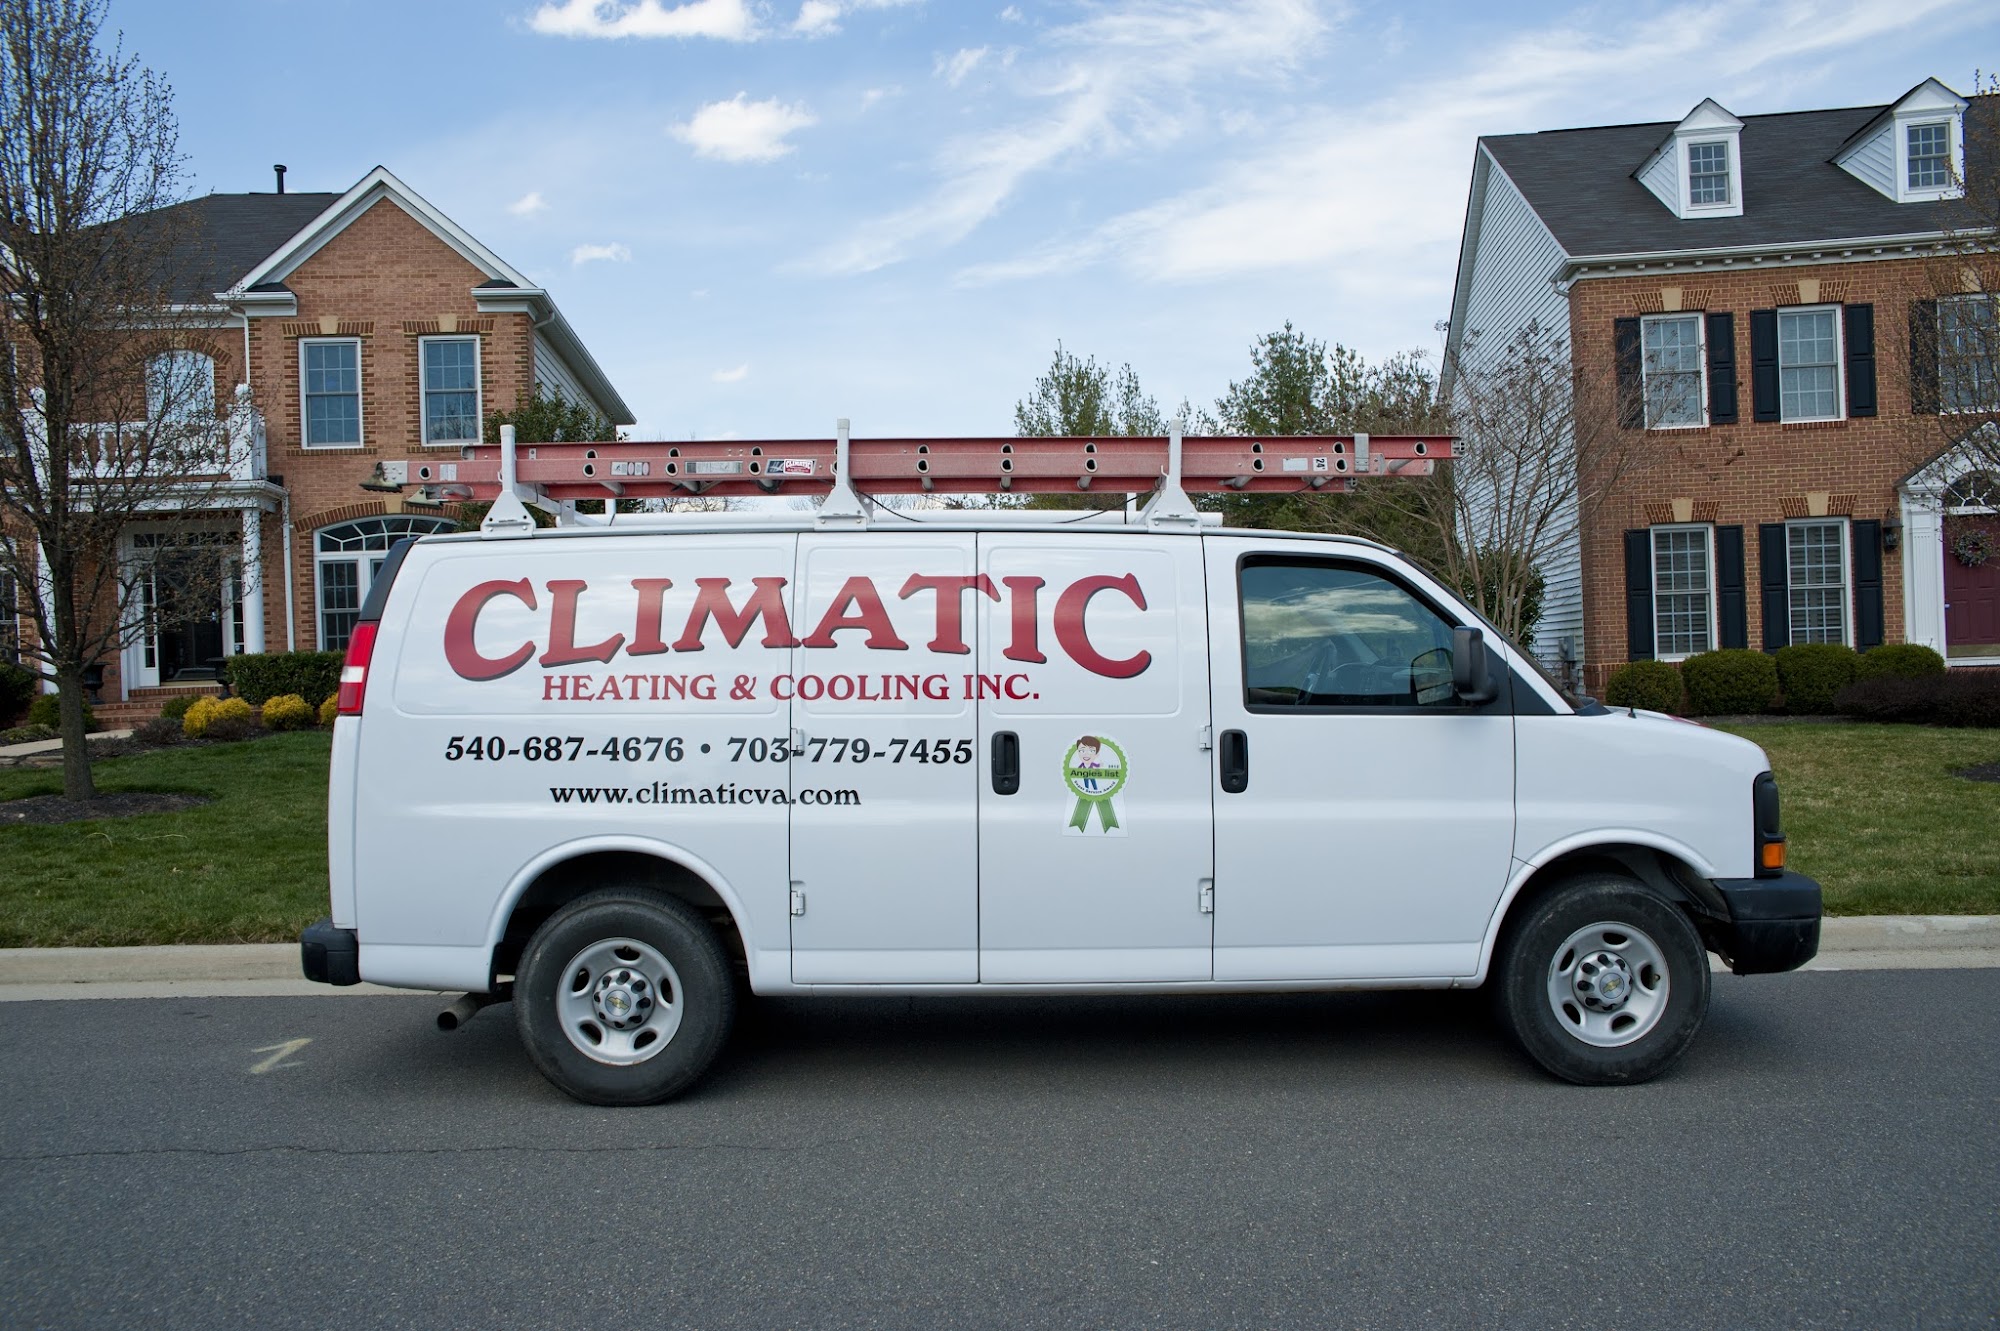 Climatic Heating and Cooling, Inc